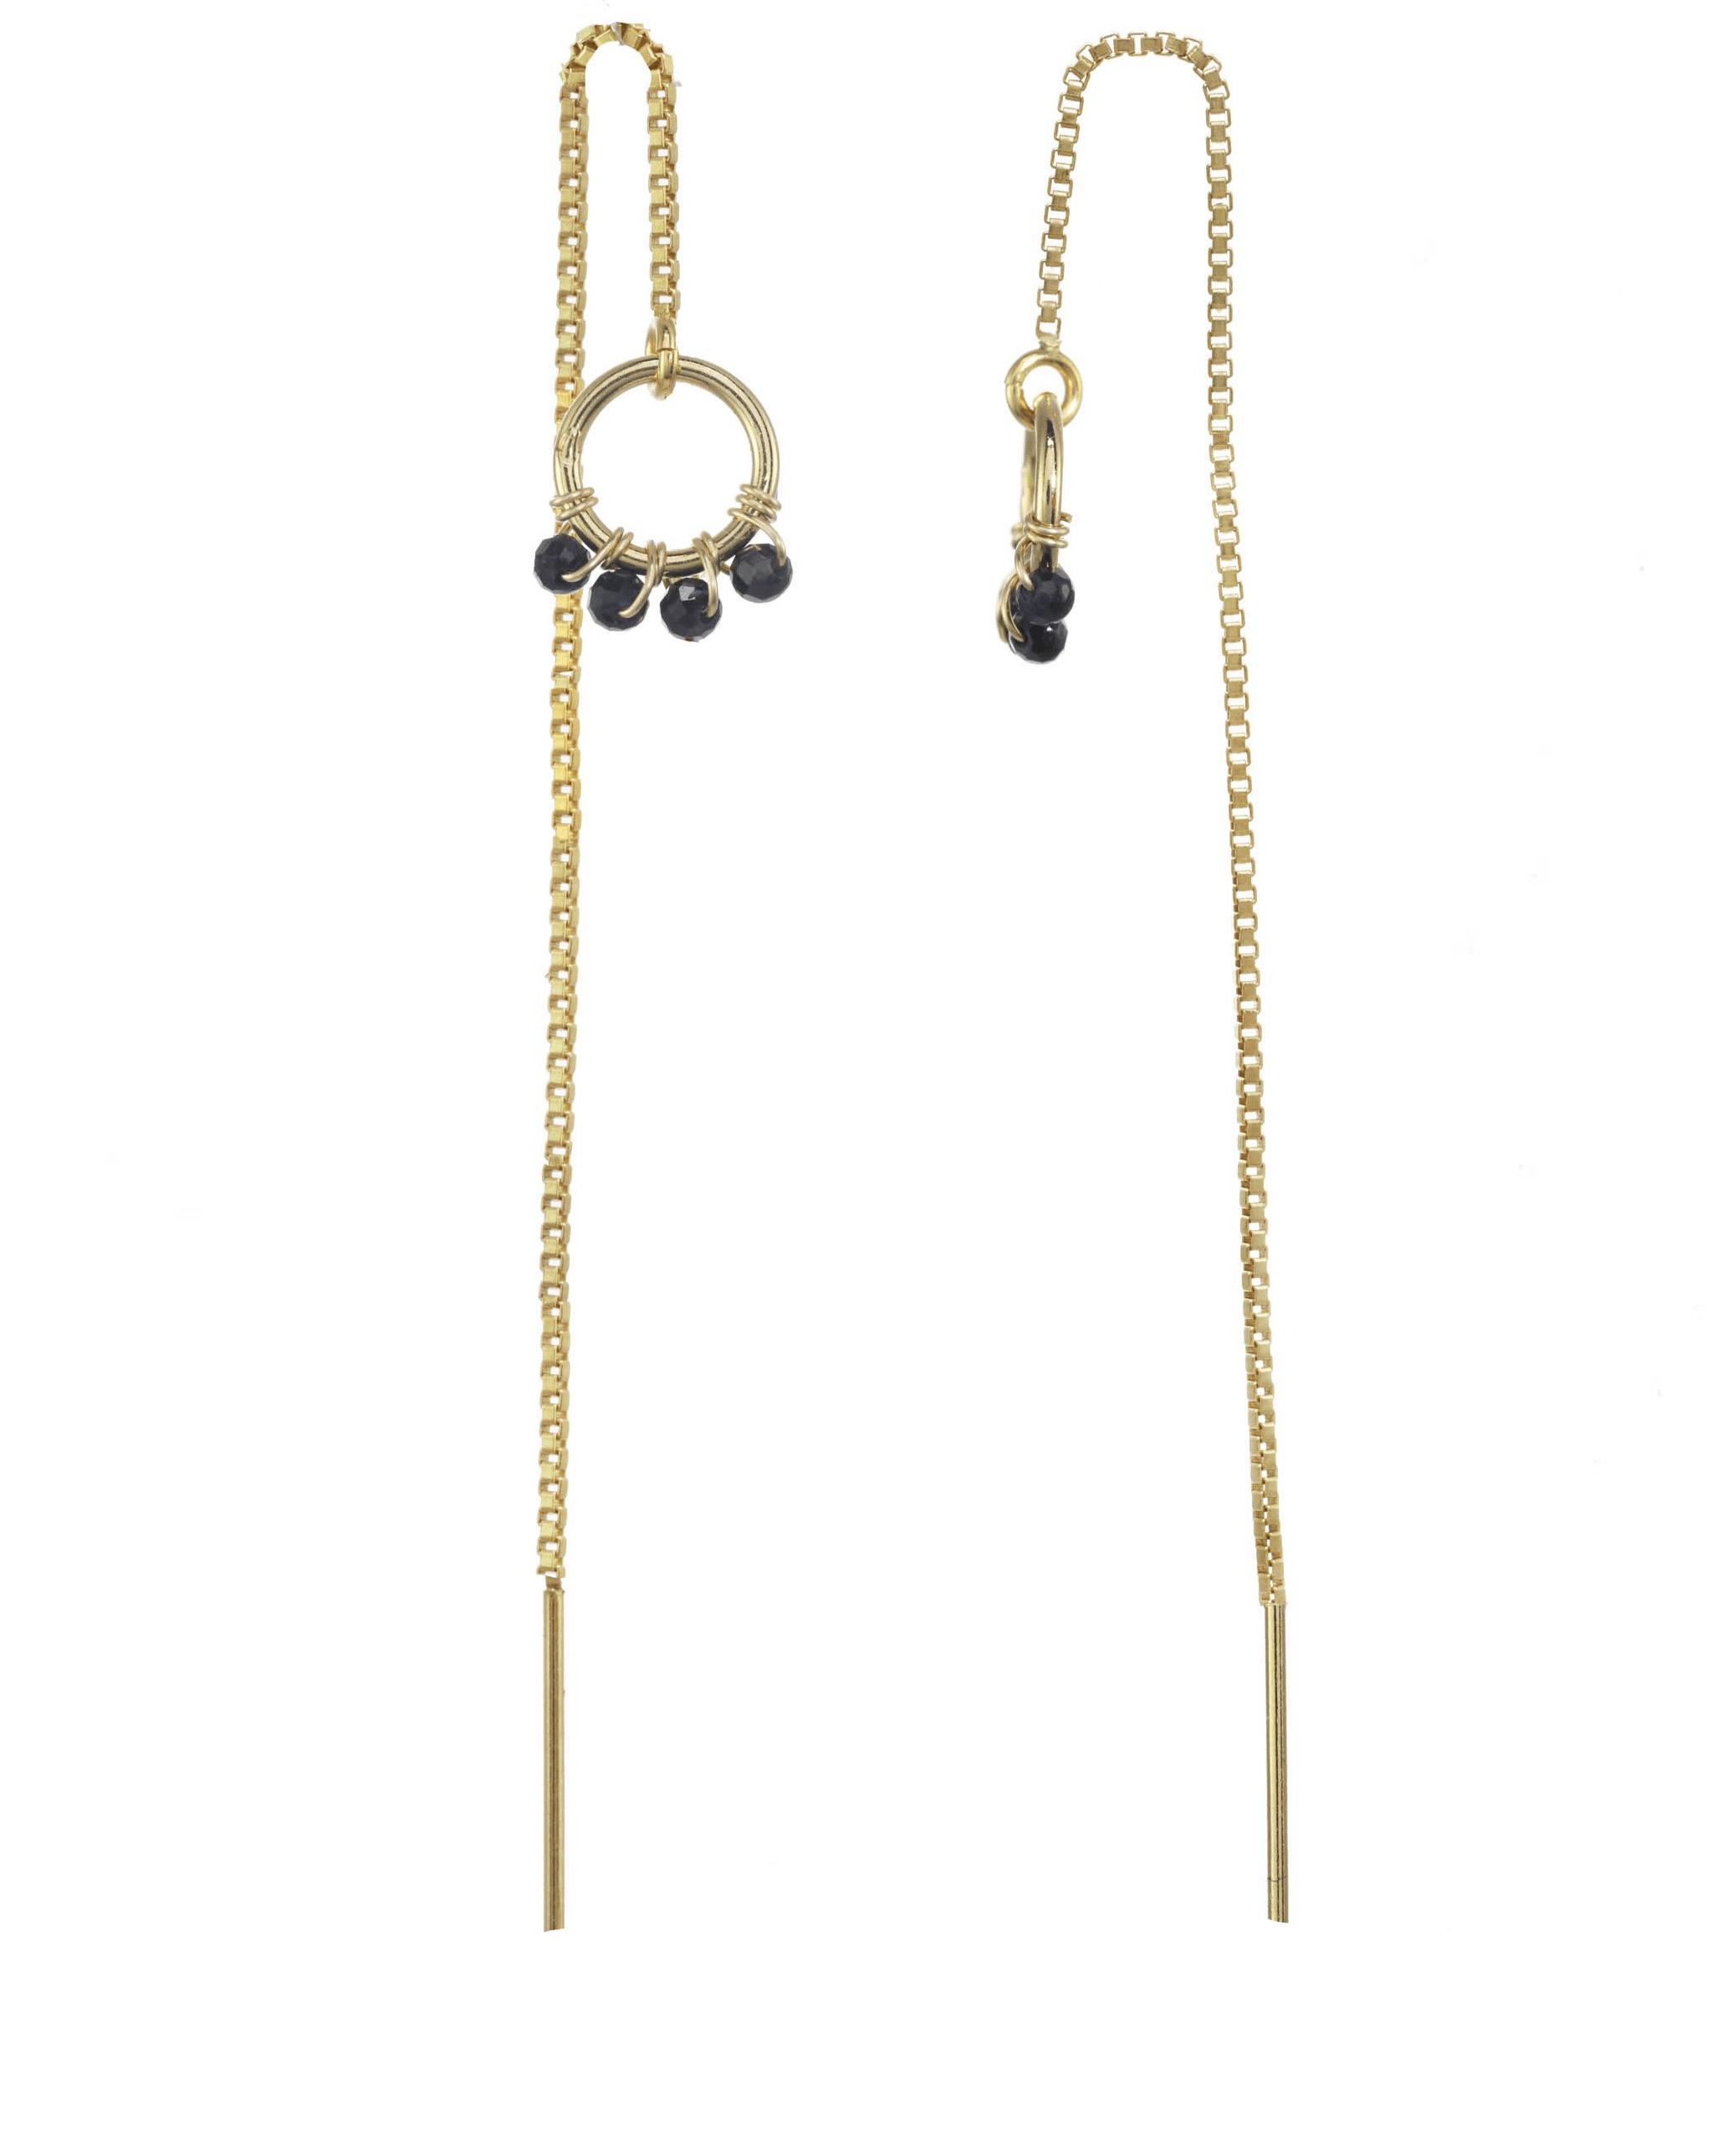 Onda Threader Earrings by KOZAKH. Box chain threader style earrings, crafted in 14K Gold Filled, featuring 2mm faceted gems.